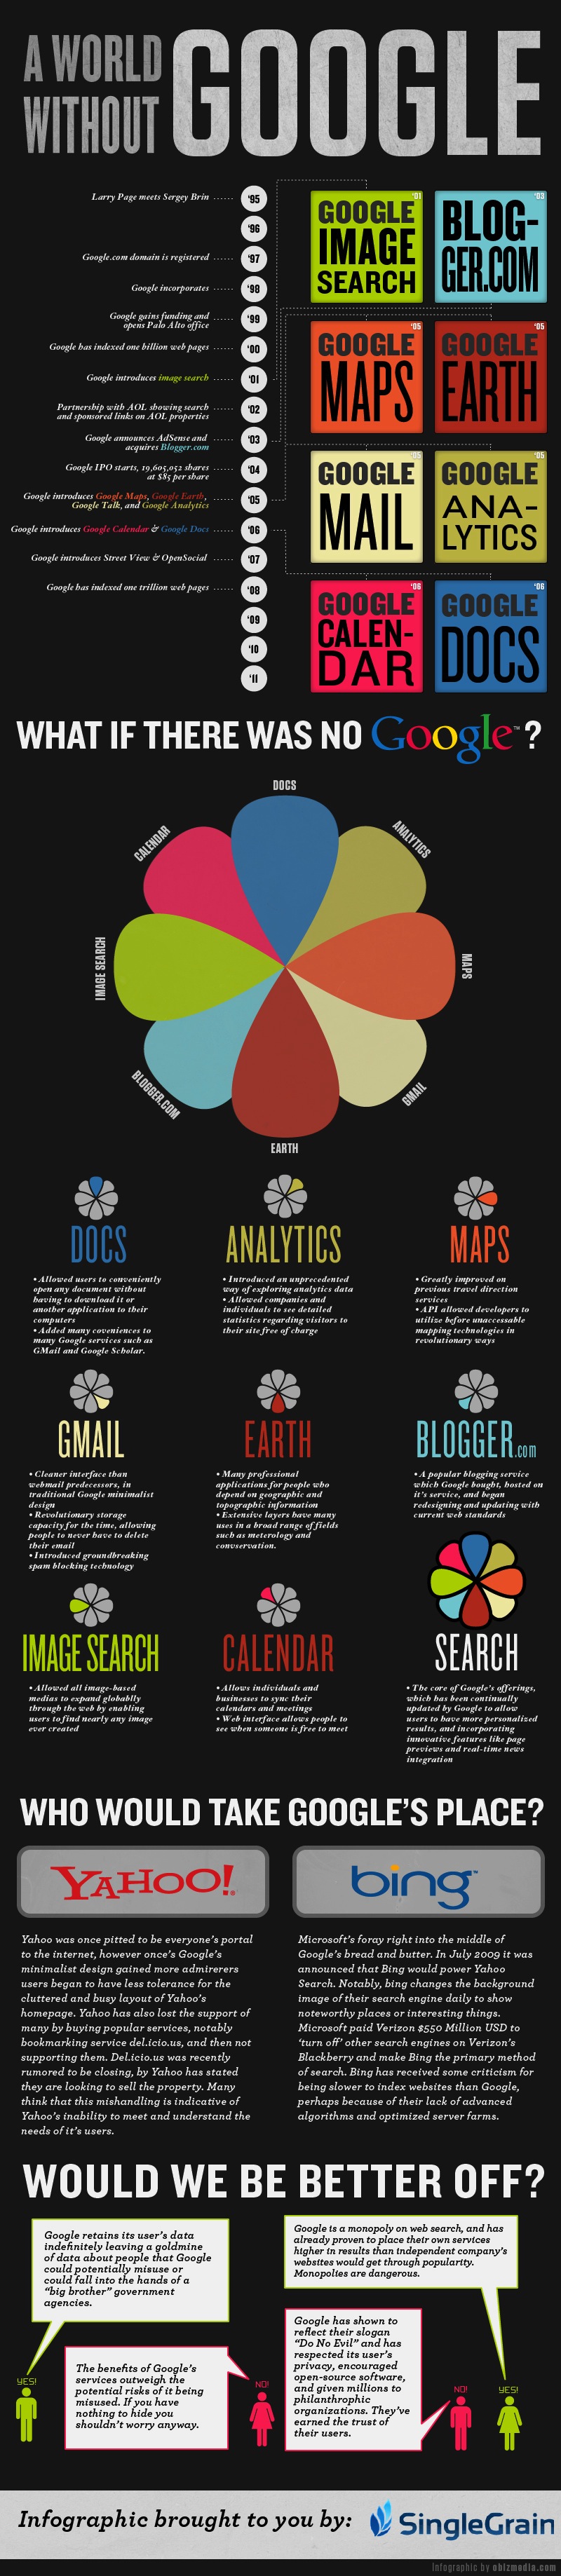 A-World-Without-Google-Infographic-1